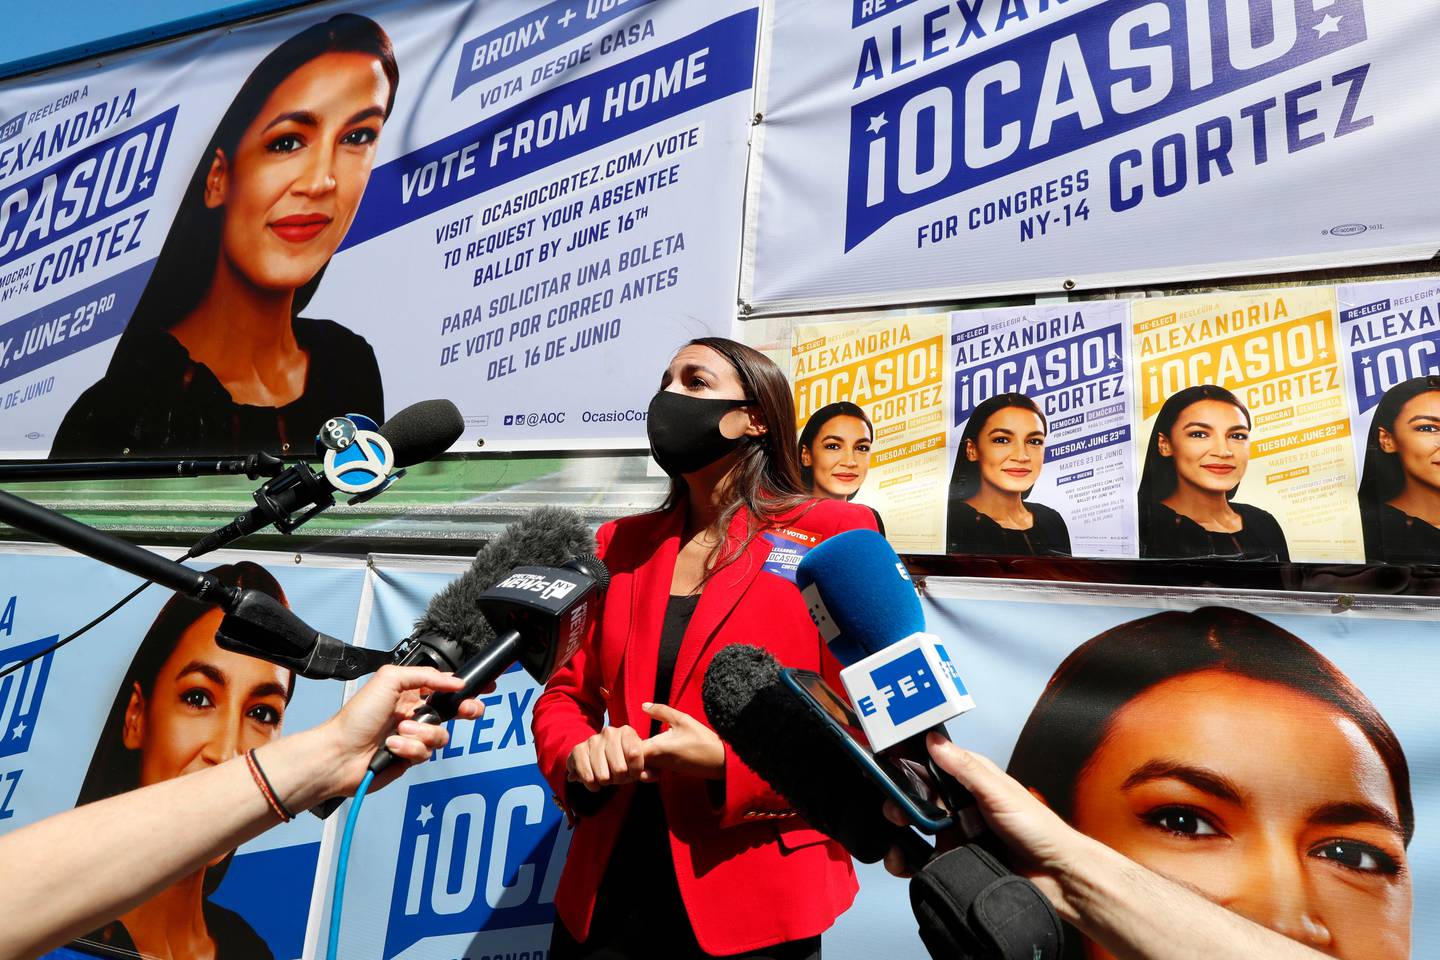 U.S. Rep. Alexandria Ocasio-Cortez, D, New York, center, speaks to members of the media while standing beside a truck plastered with campaign posters after greeting voters in Astoria, Queens, Tuesday, June 23, 2020, on primary election day in New York. (AP Photo/Kathy Willens)